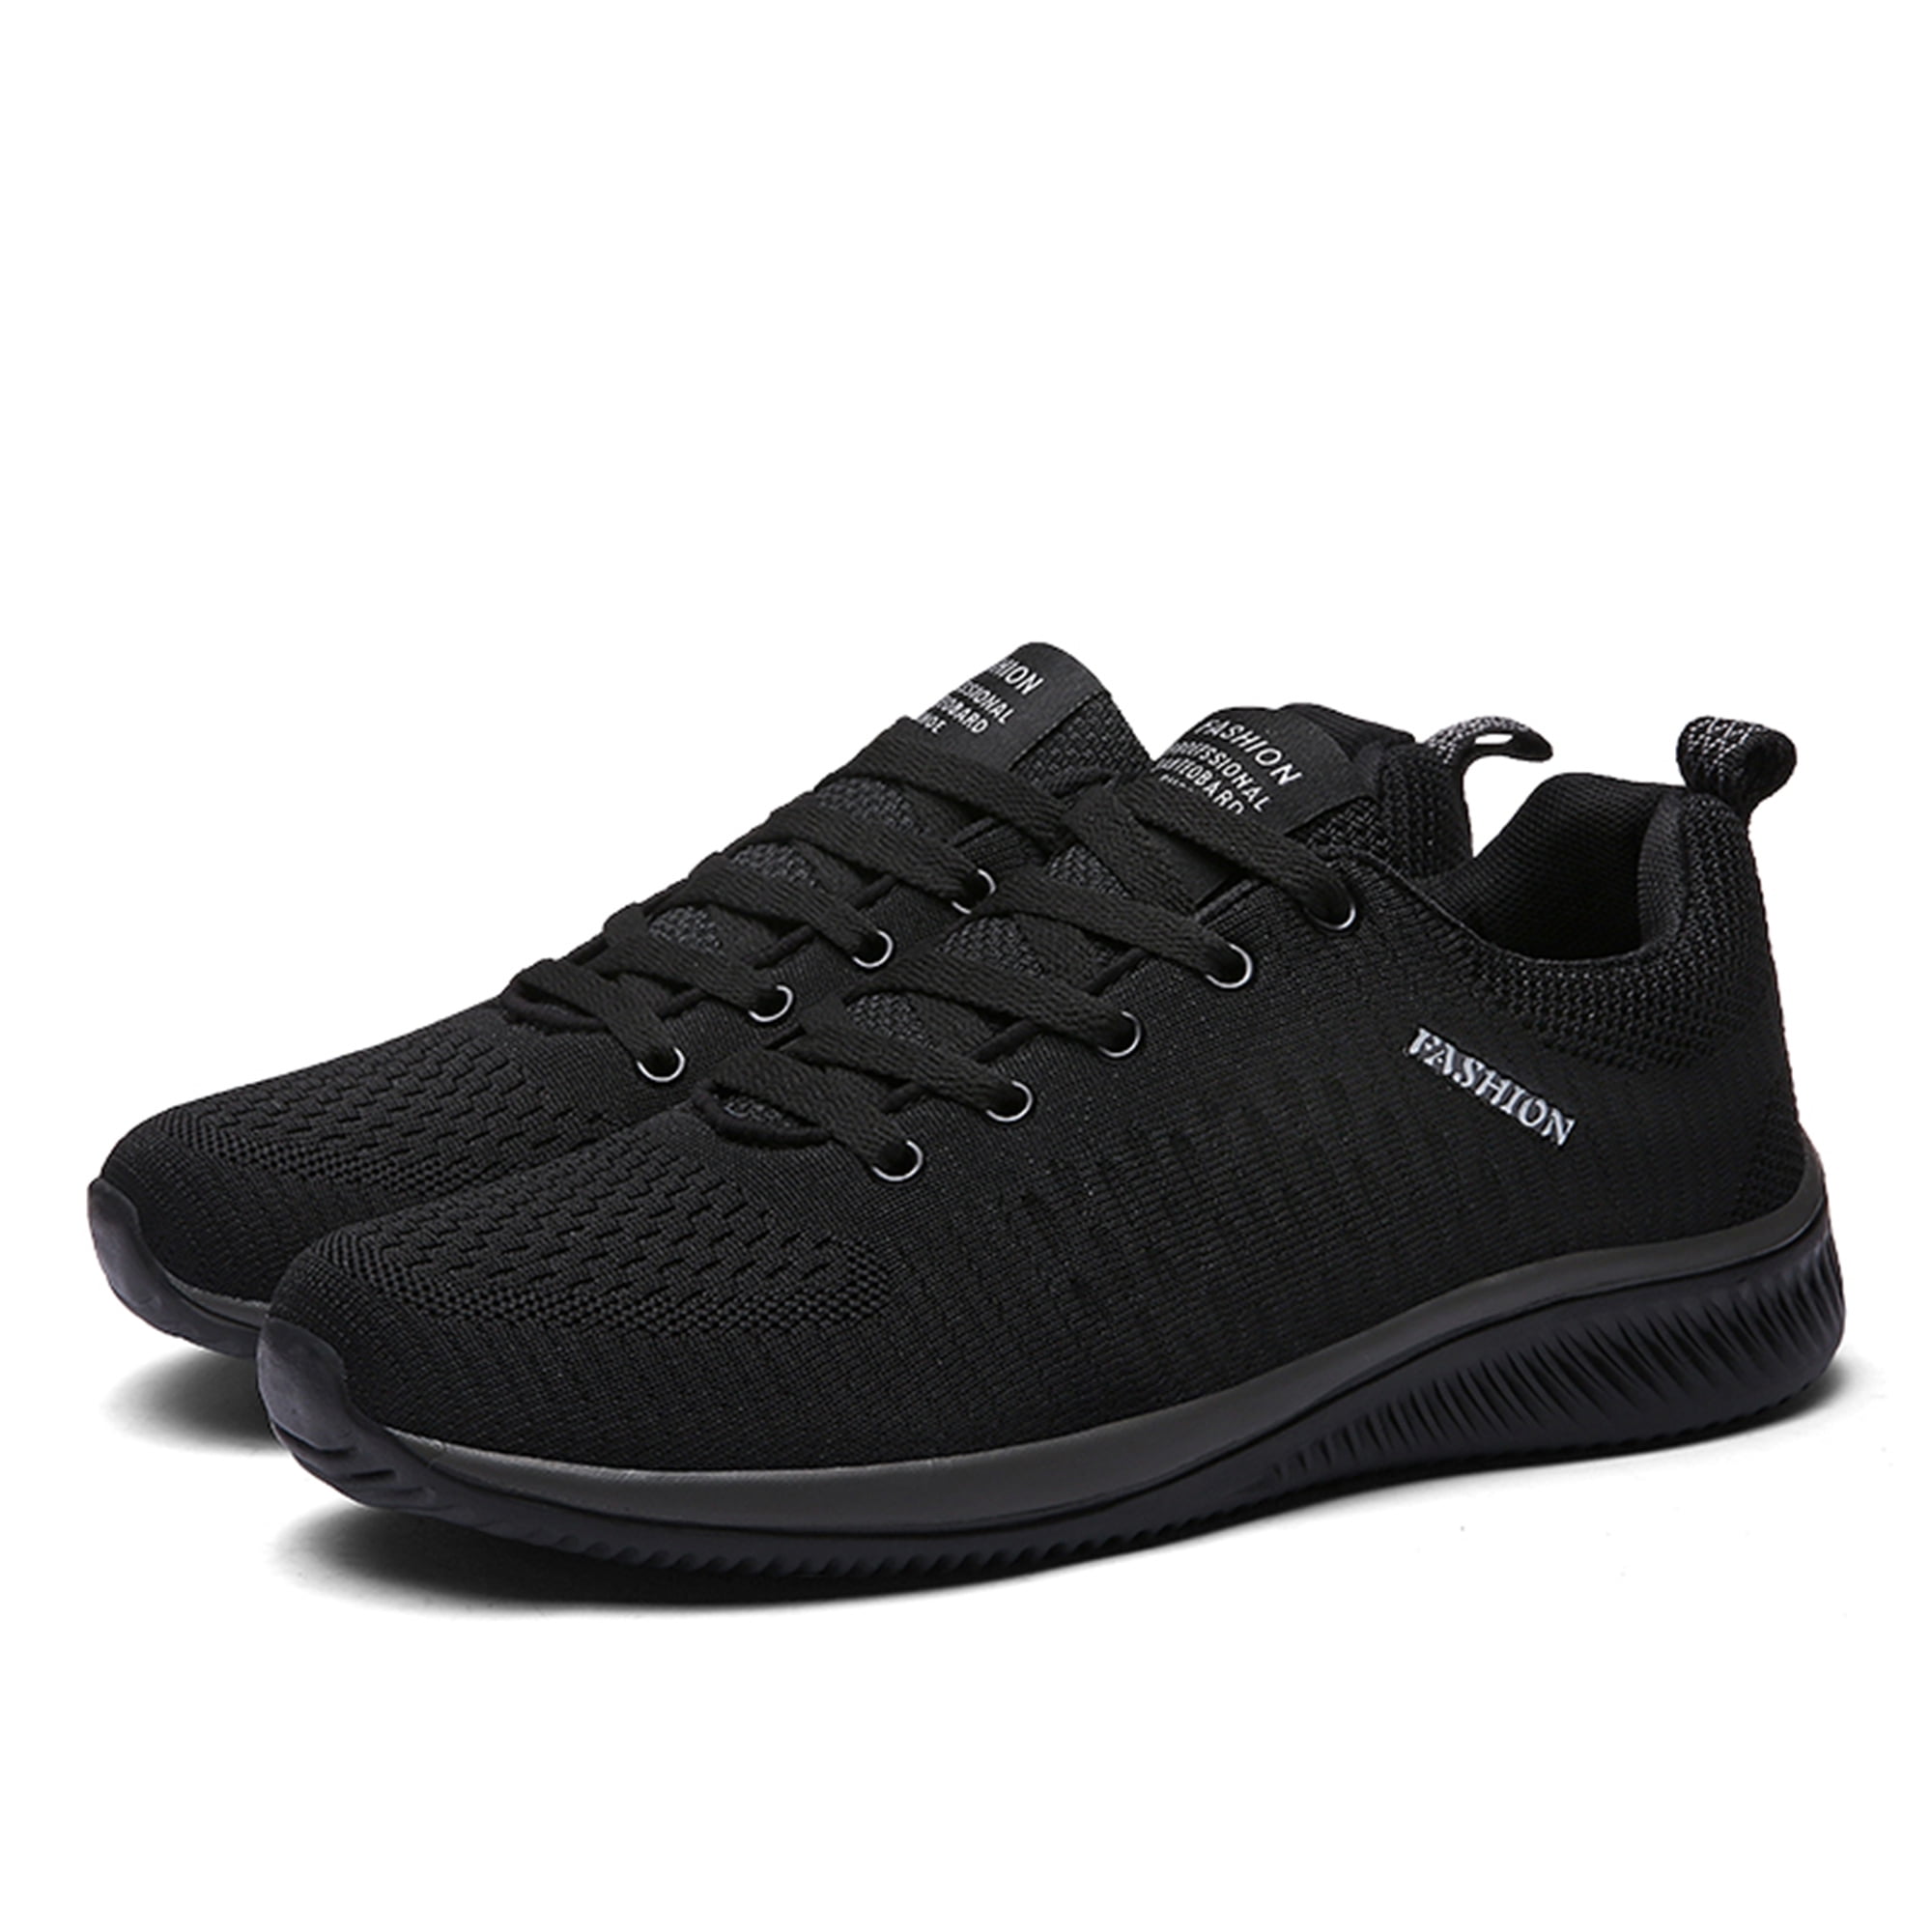 Htcenly Fashion Sneakers for Men Breathable Mesh Athletic Running ...